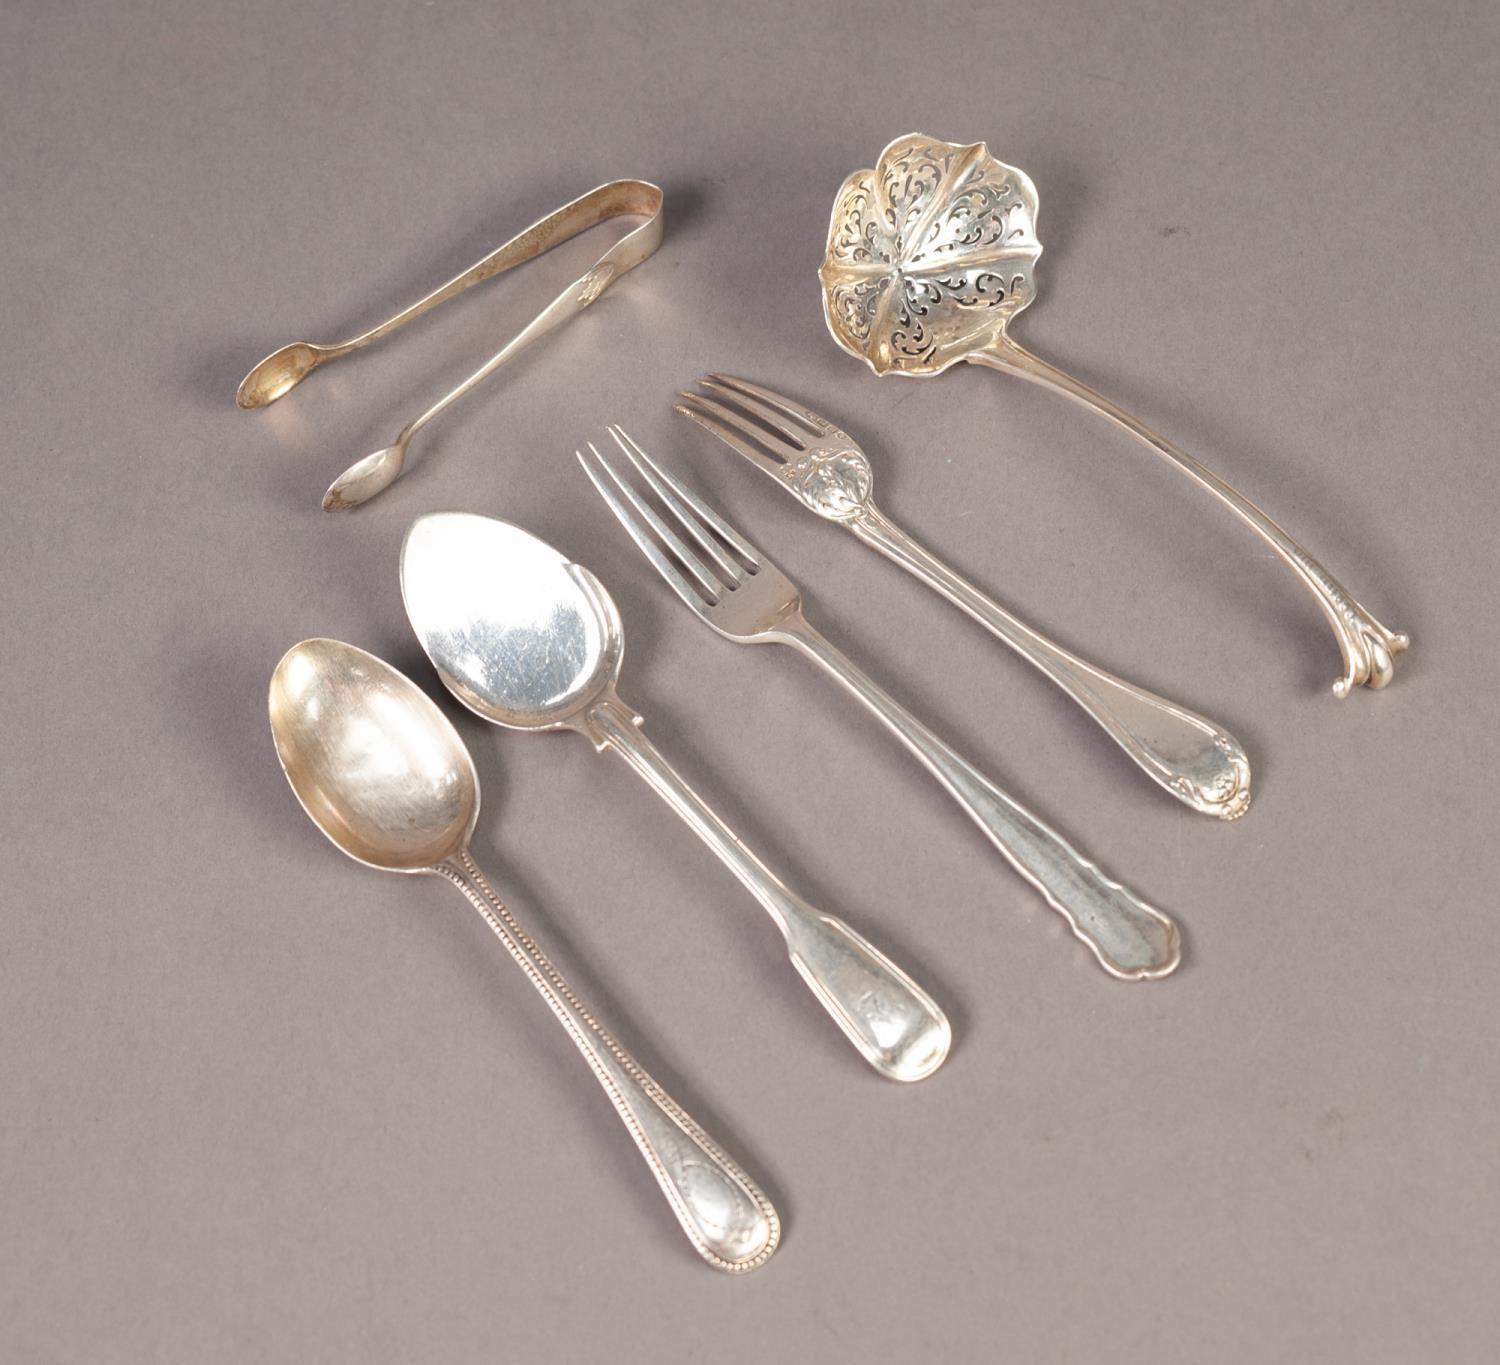 *VICTORIAN ONSLOW PATTERN SIFTING SPOON BY H.J. LIAS & SON, London 1852, together with a PAIR OF